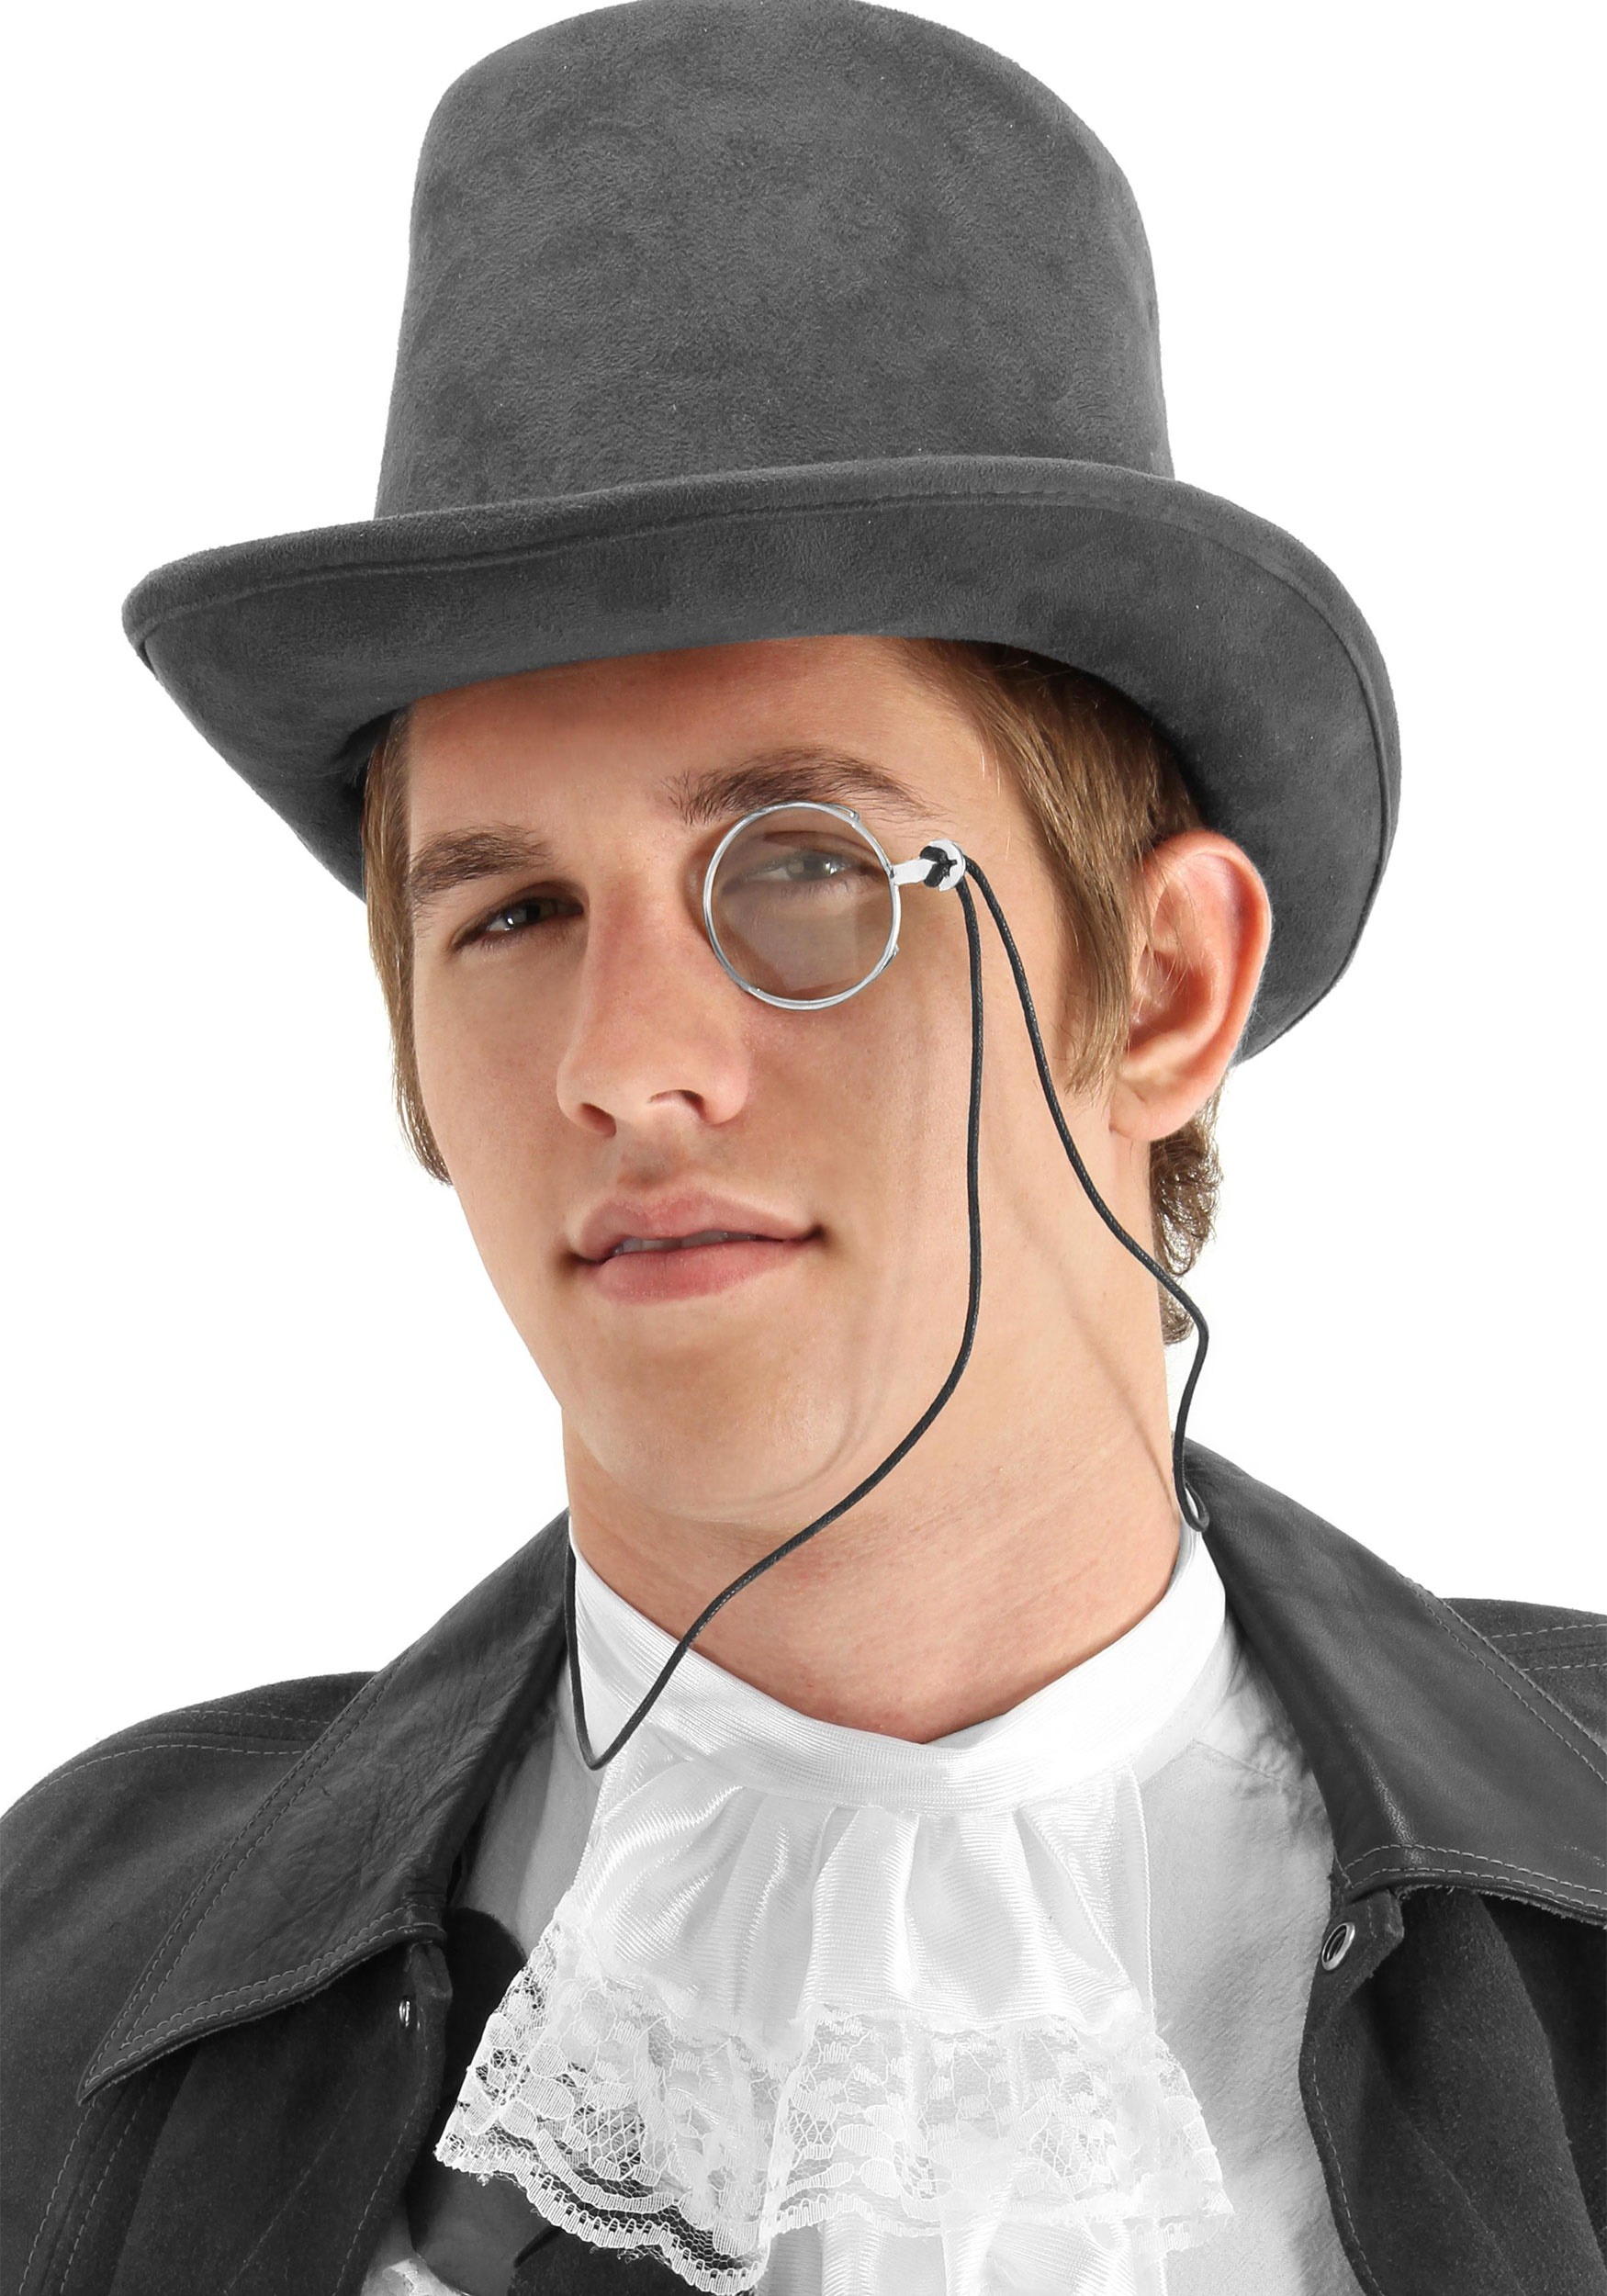 How To Wear A Monocle